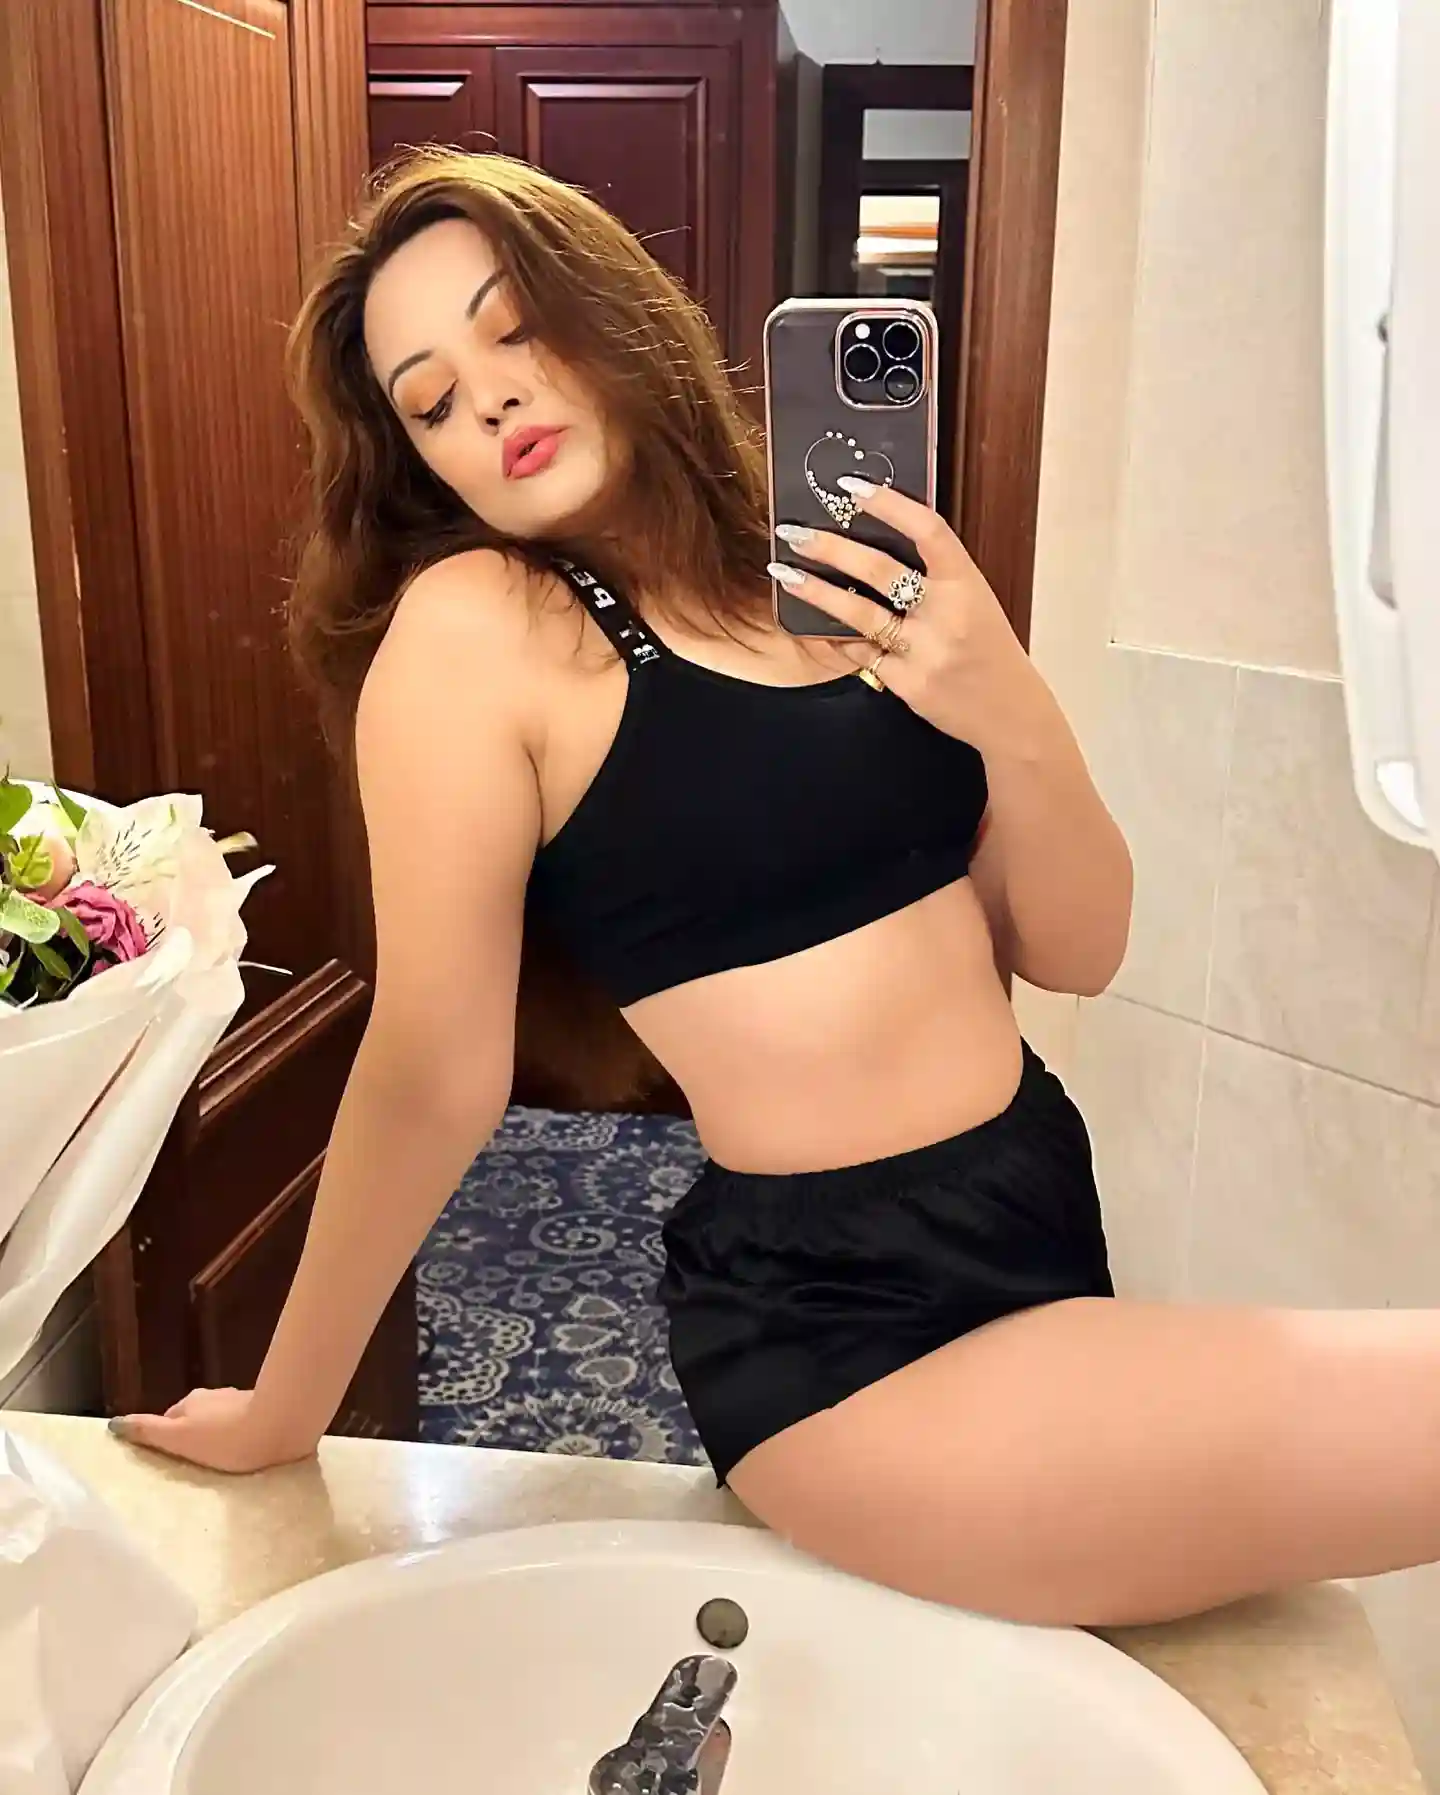 Diva Mishra Independent Escorts Call Girls Service Low Price Genuine Sexy Vip Call Girl Most Awesome sex 